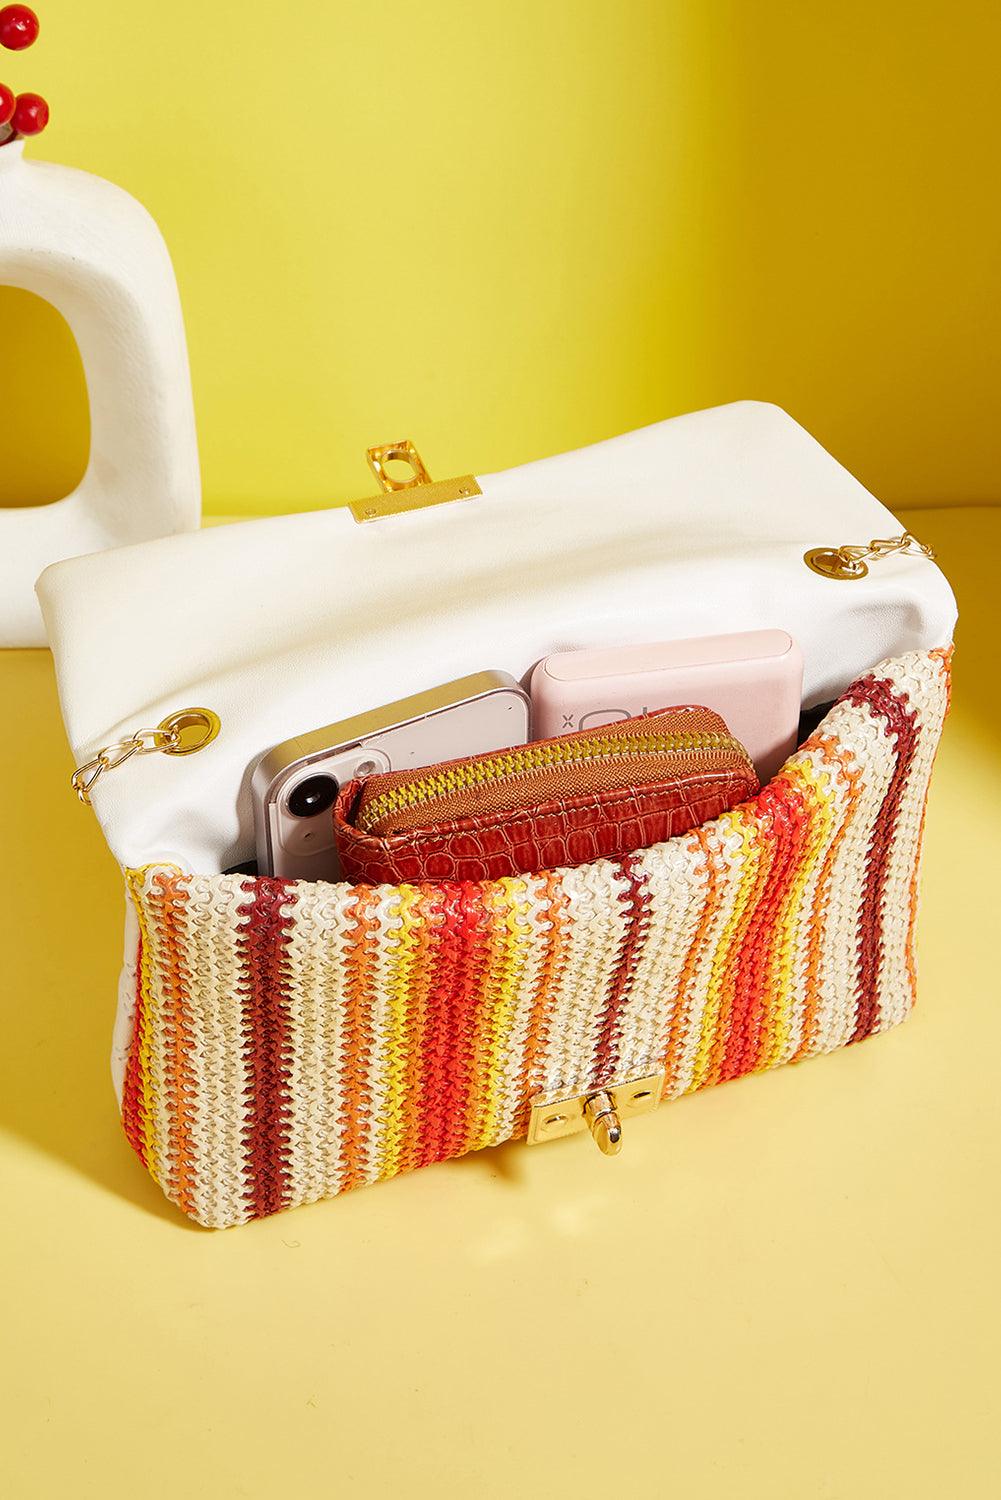 White Quilted Flap Printed Knit Chain Single Shoulder Bag